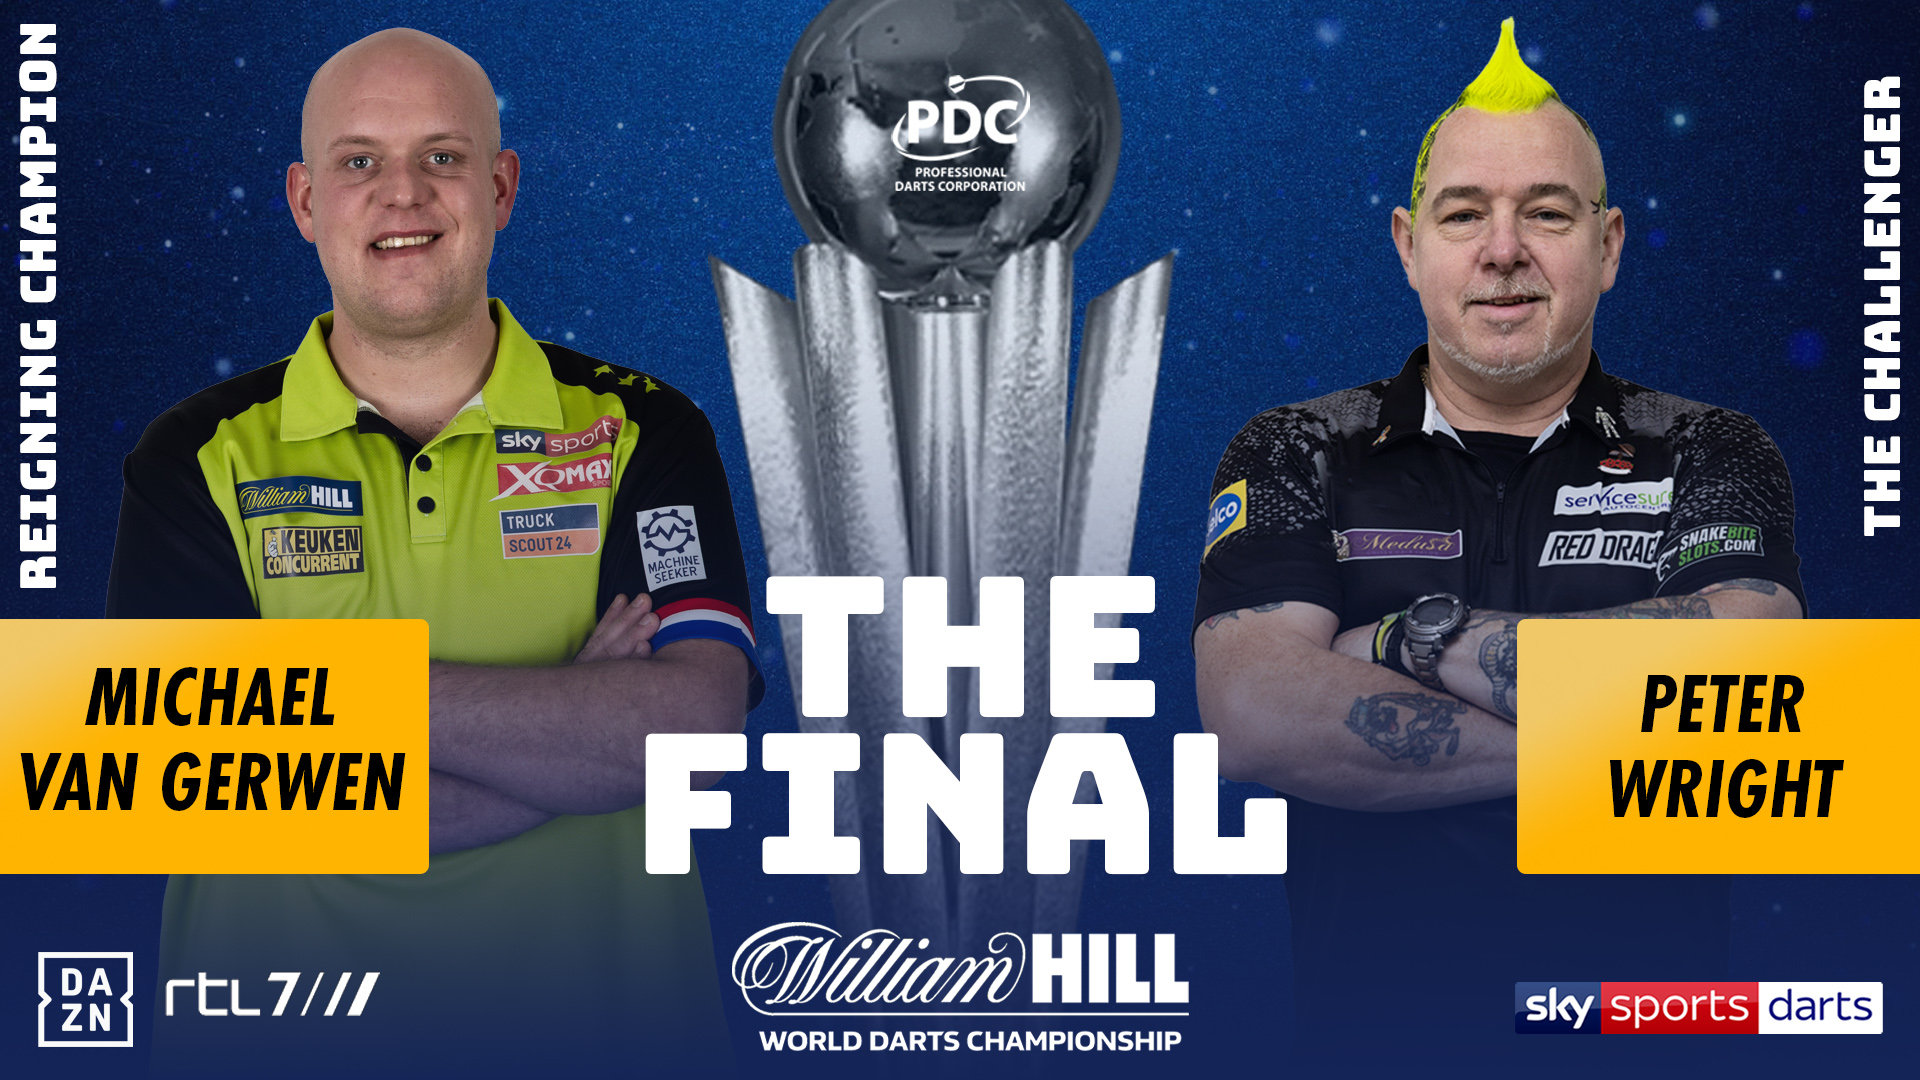 PDC Darts on Twitter: "THE FINAL! Michael Gerwen will face Peter Wright for the 2019/20 @WilliamHill World Darts Championship title! Who will be crowned World Champion? https://t.co/49mp5x2pvW" / Twitter